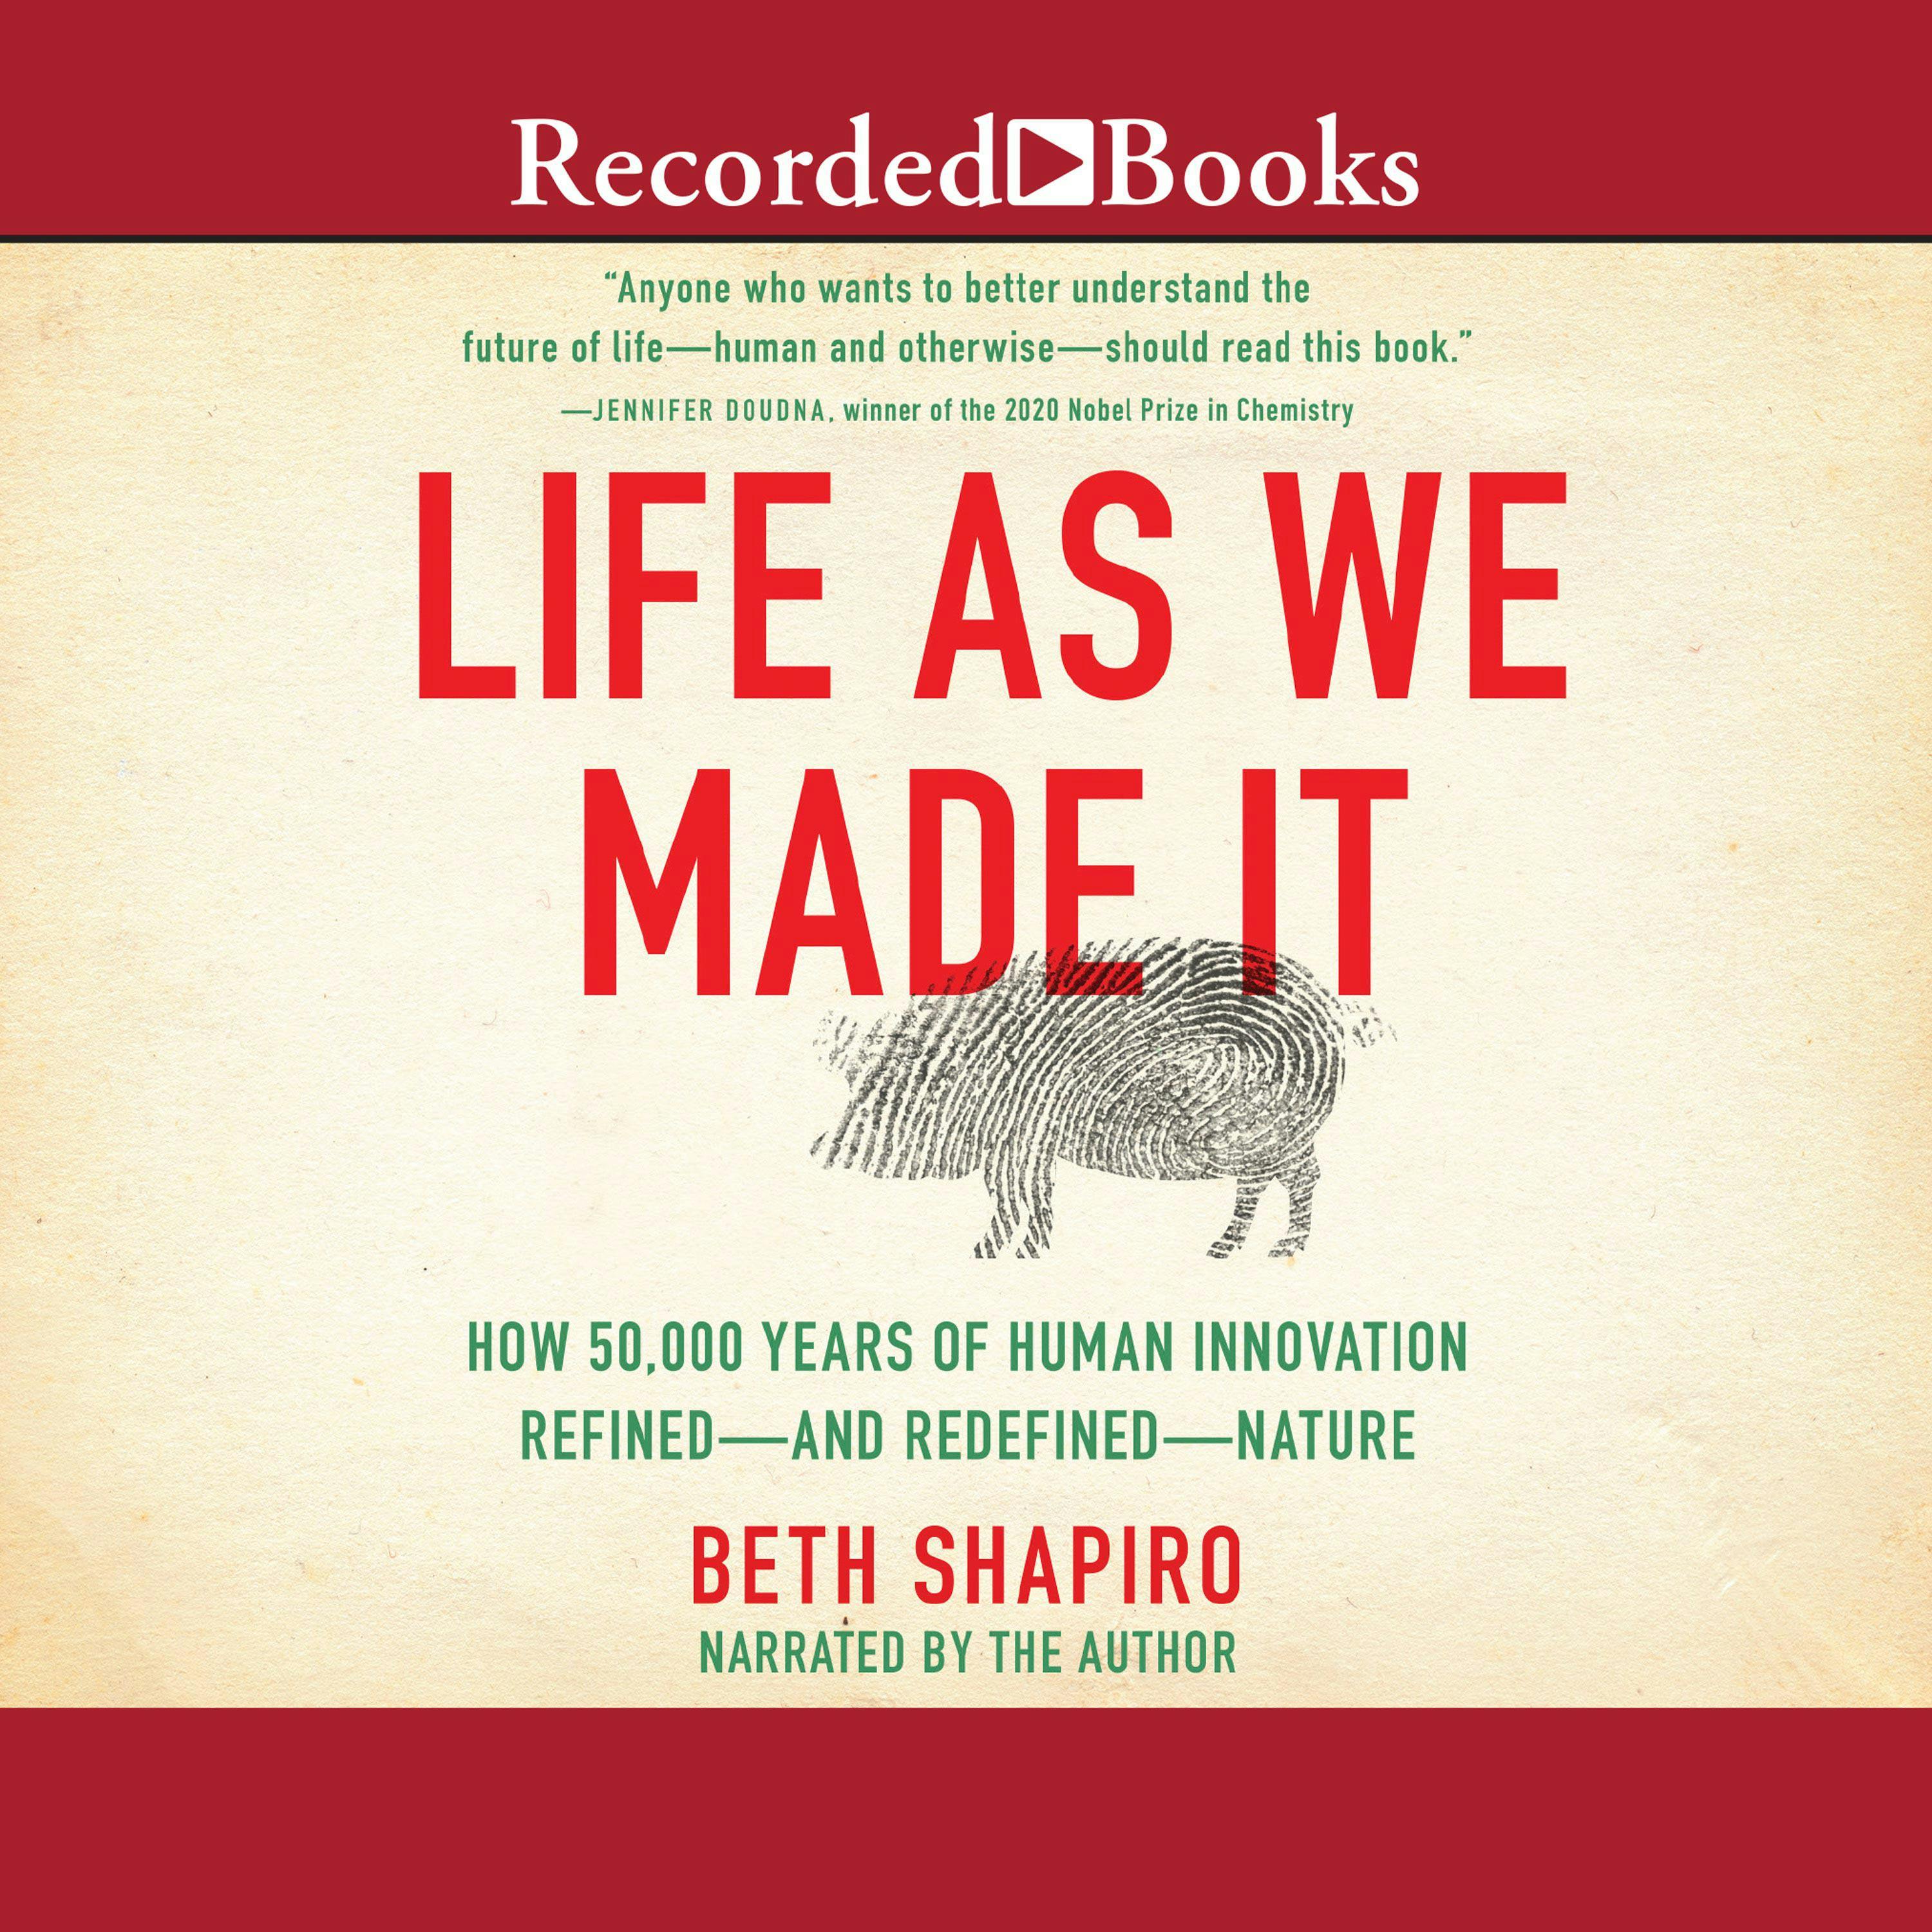 Life as We Made It: How 50,000 Years of Human Innovation Refined - And Redefined - Nature - Beth Shapiro